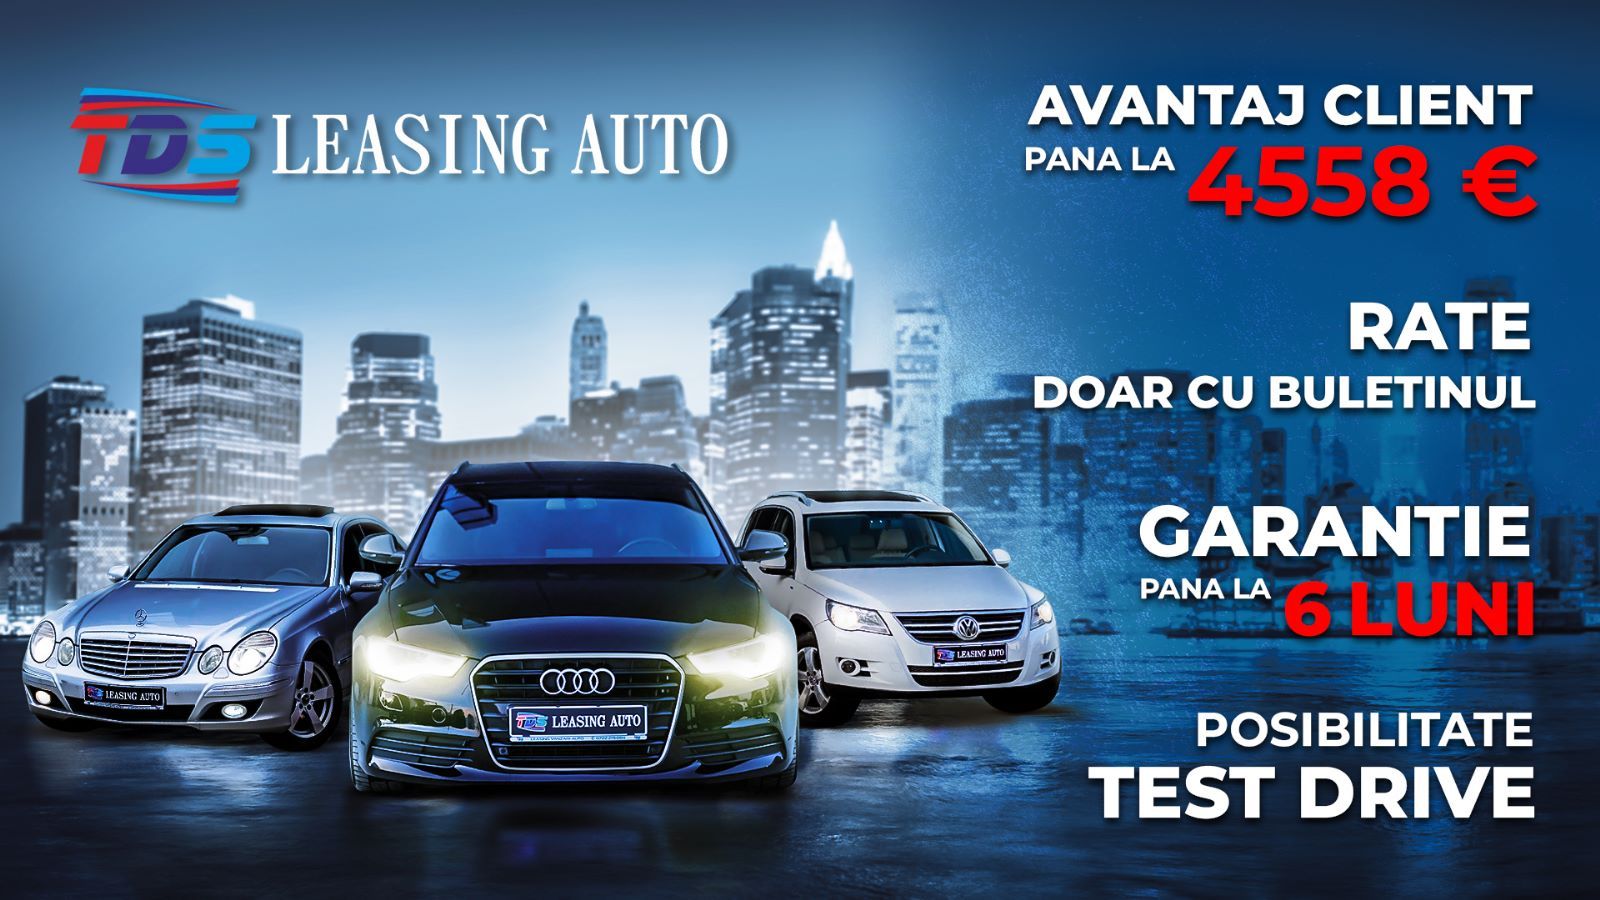 TDS Leasing Auto top banner